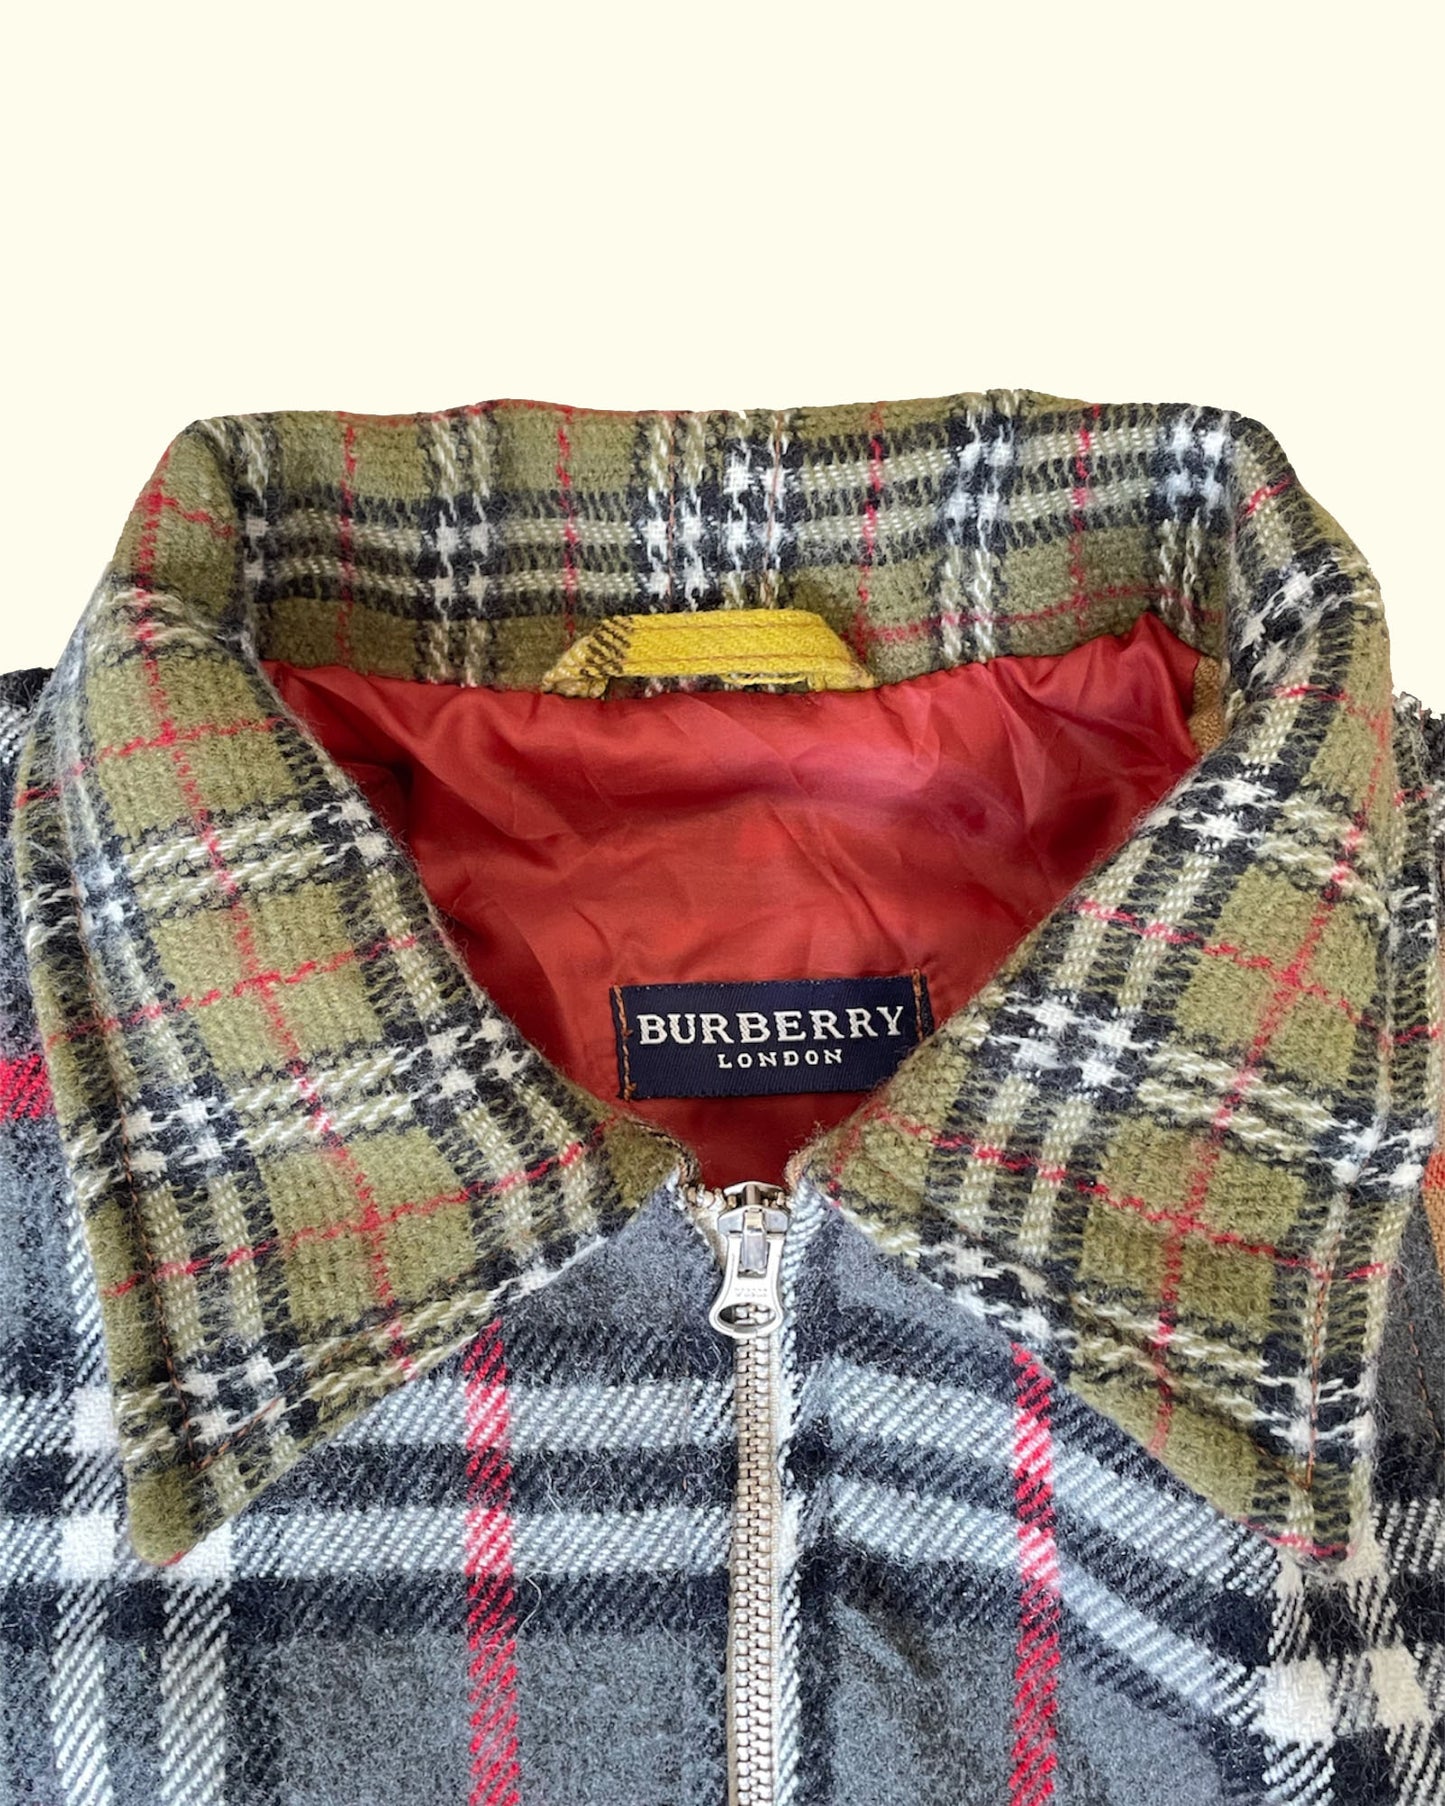 'The Poet' Burberry Reworked Jacket